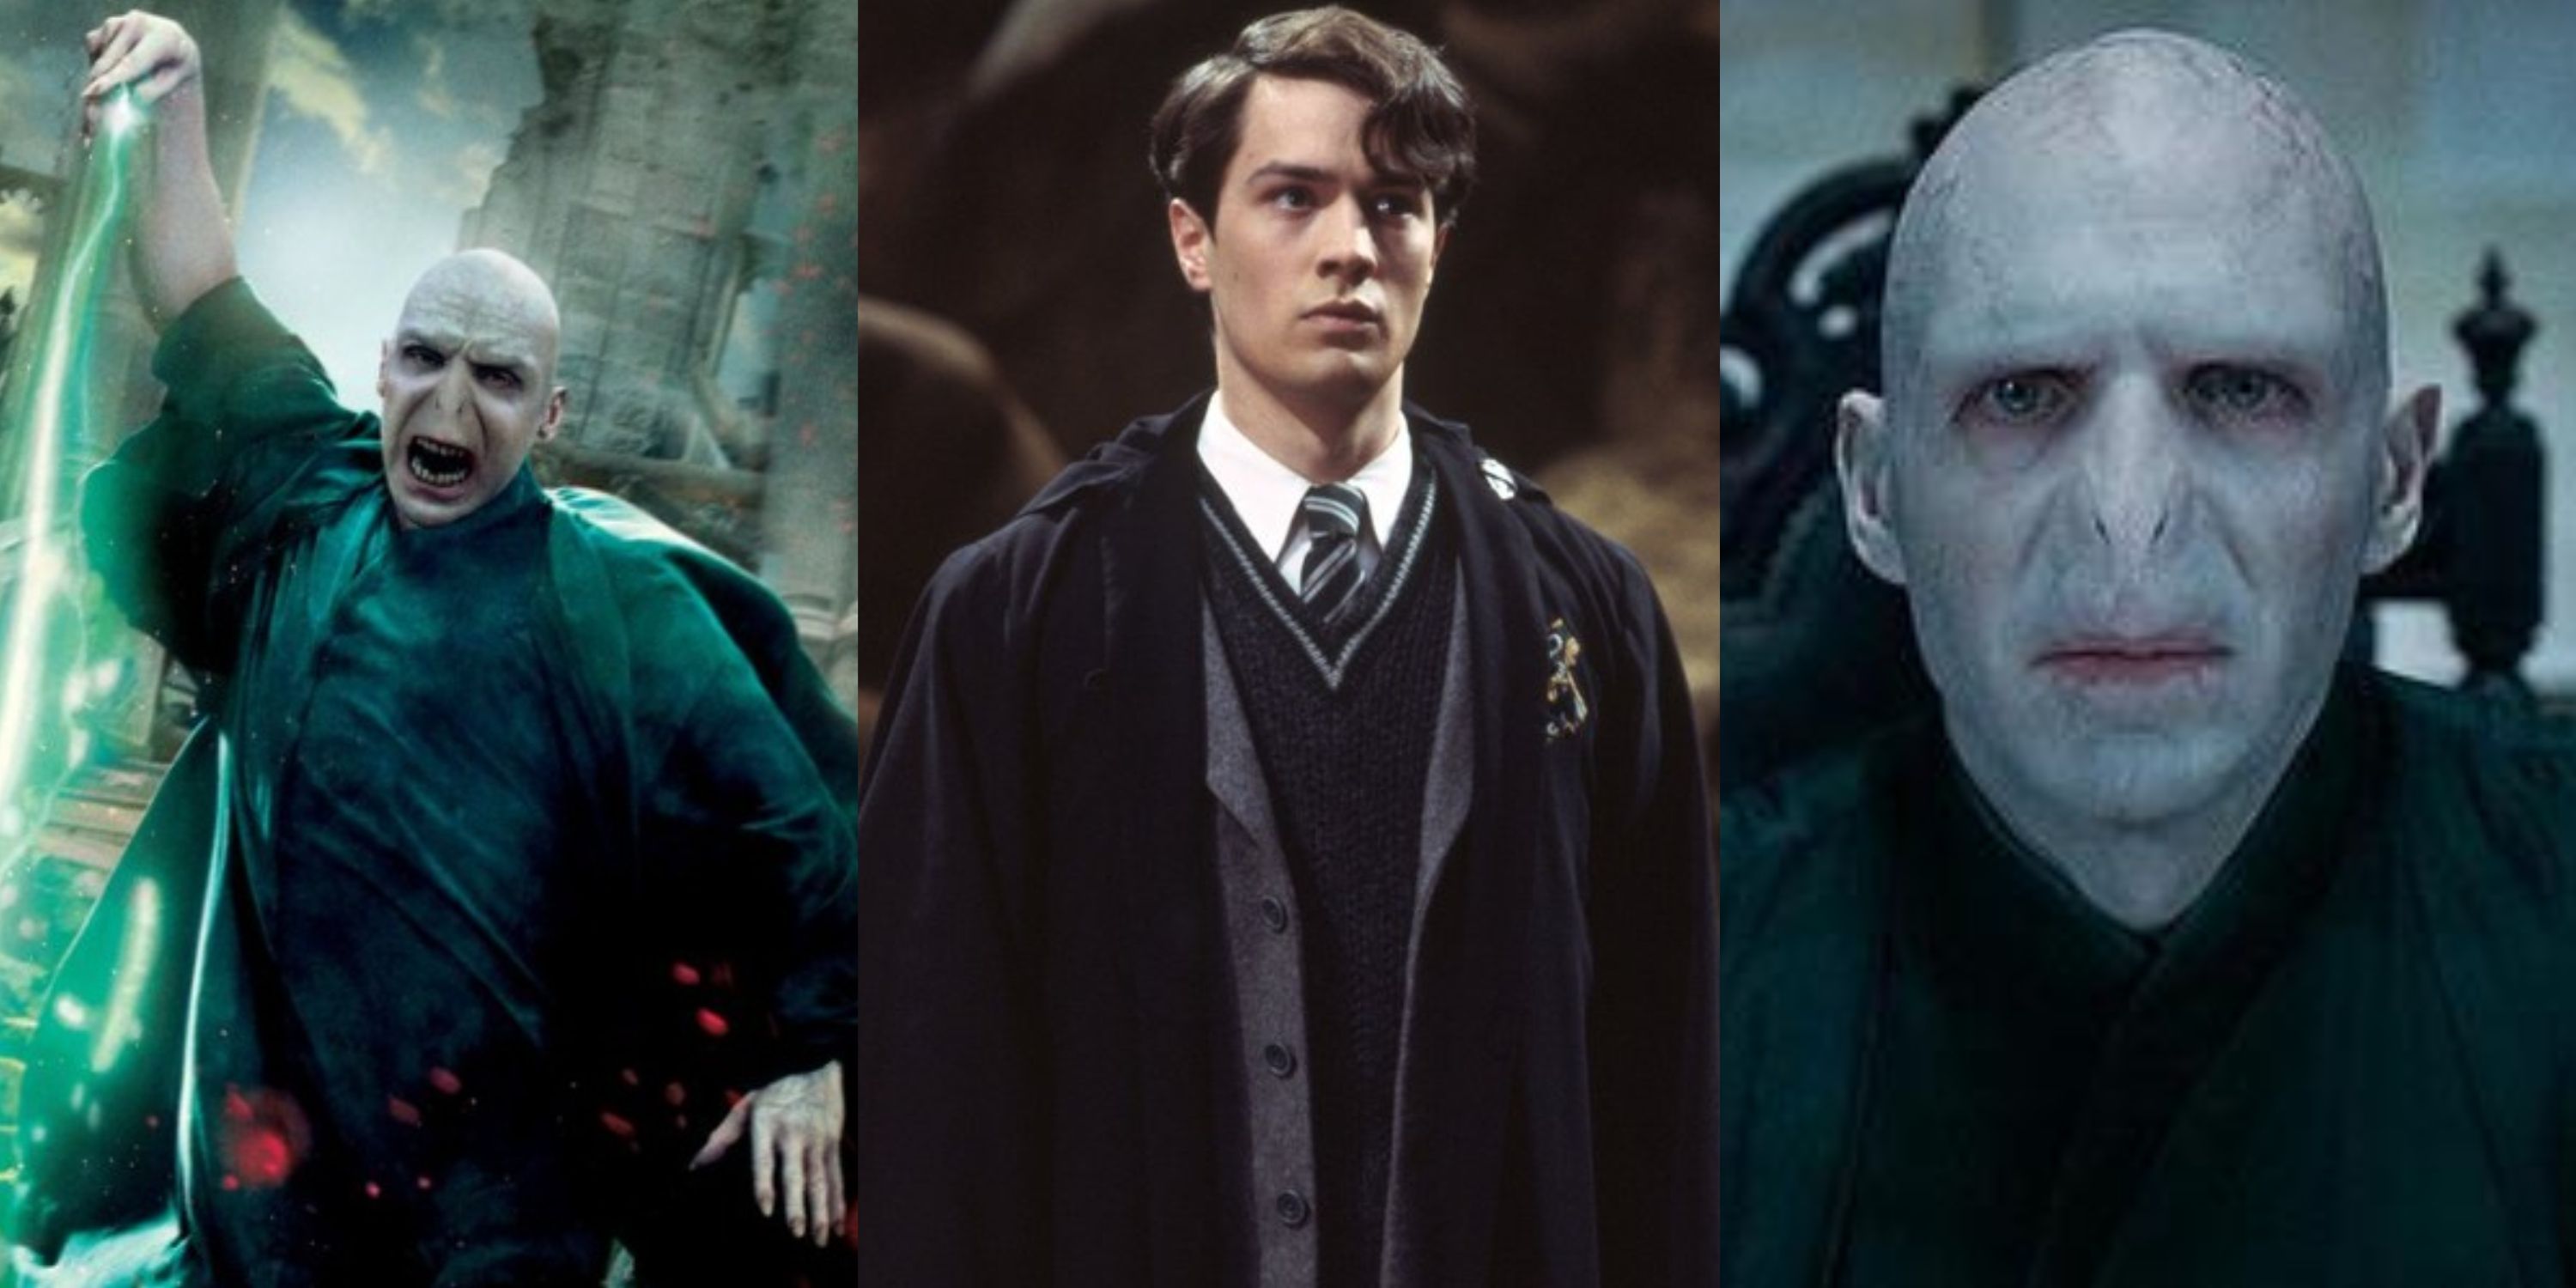 Split image of Voldemort firing a curse with his raised wand, a young Tom Riddle looking right, and Voldemort sitting looking straight ahead